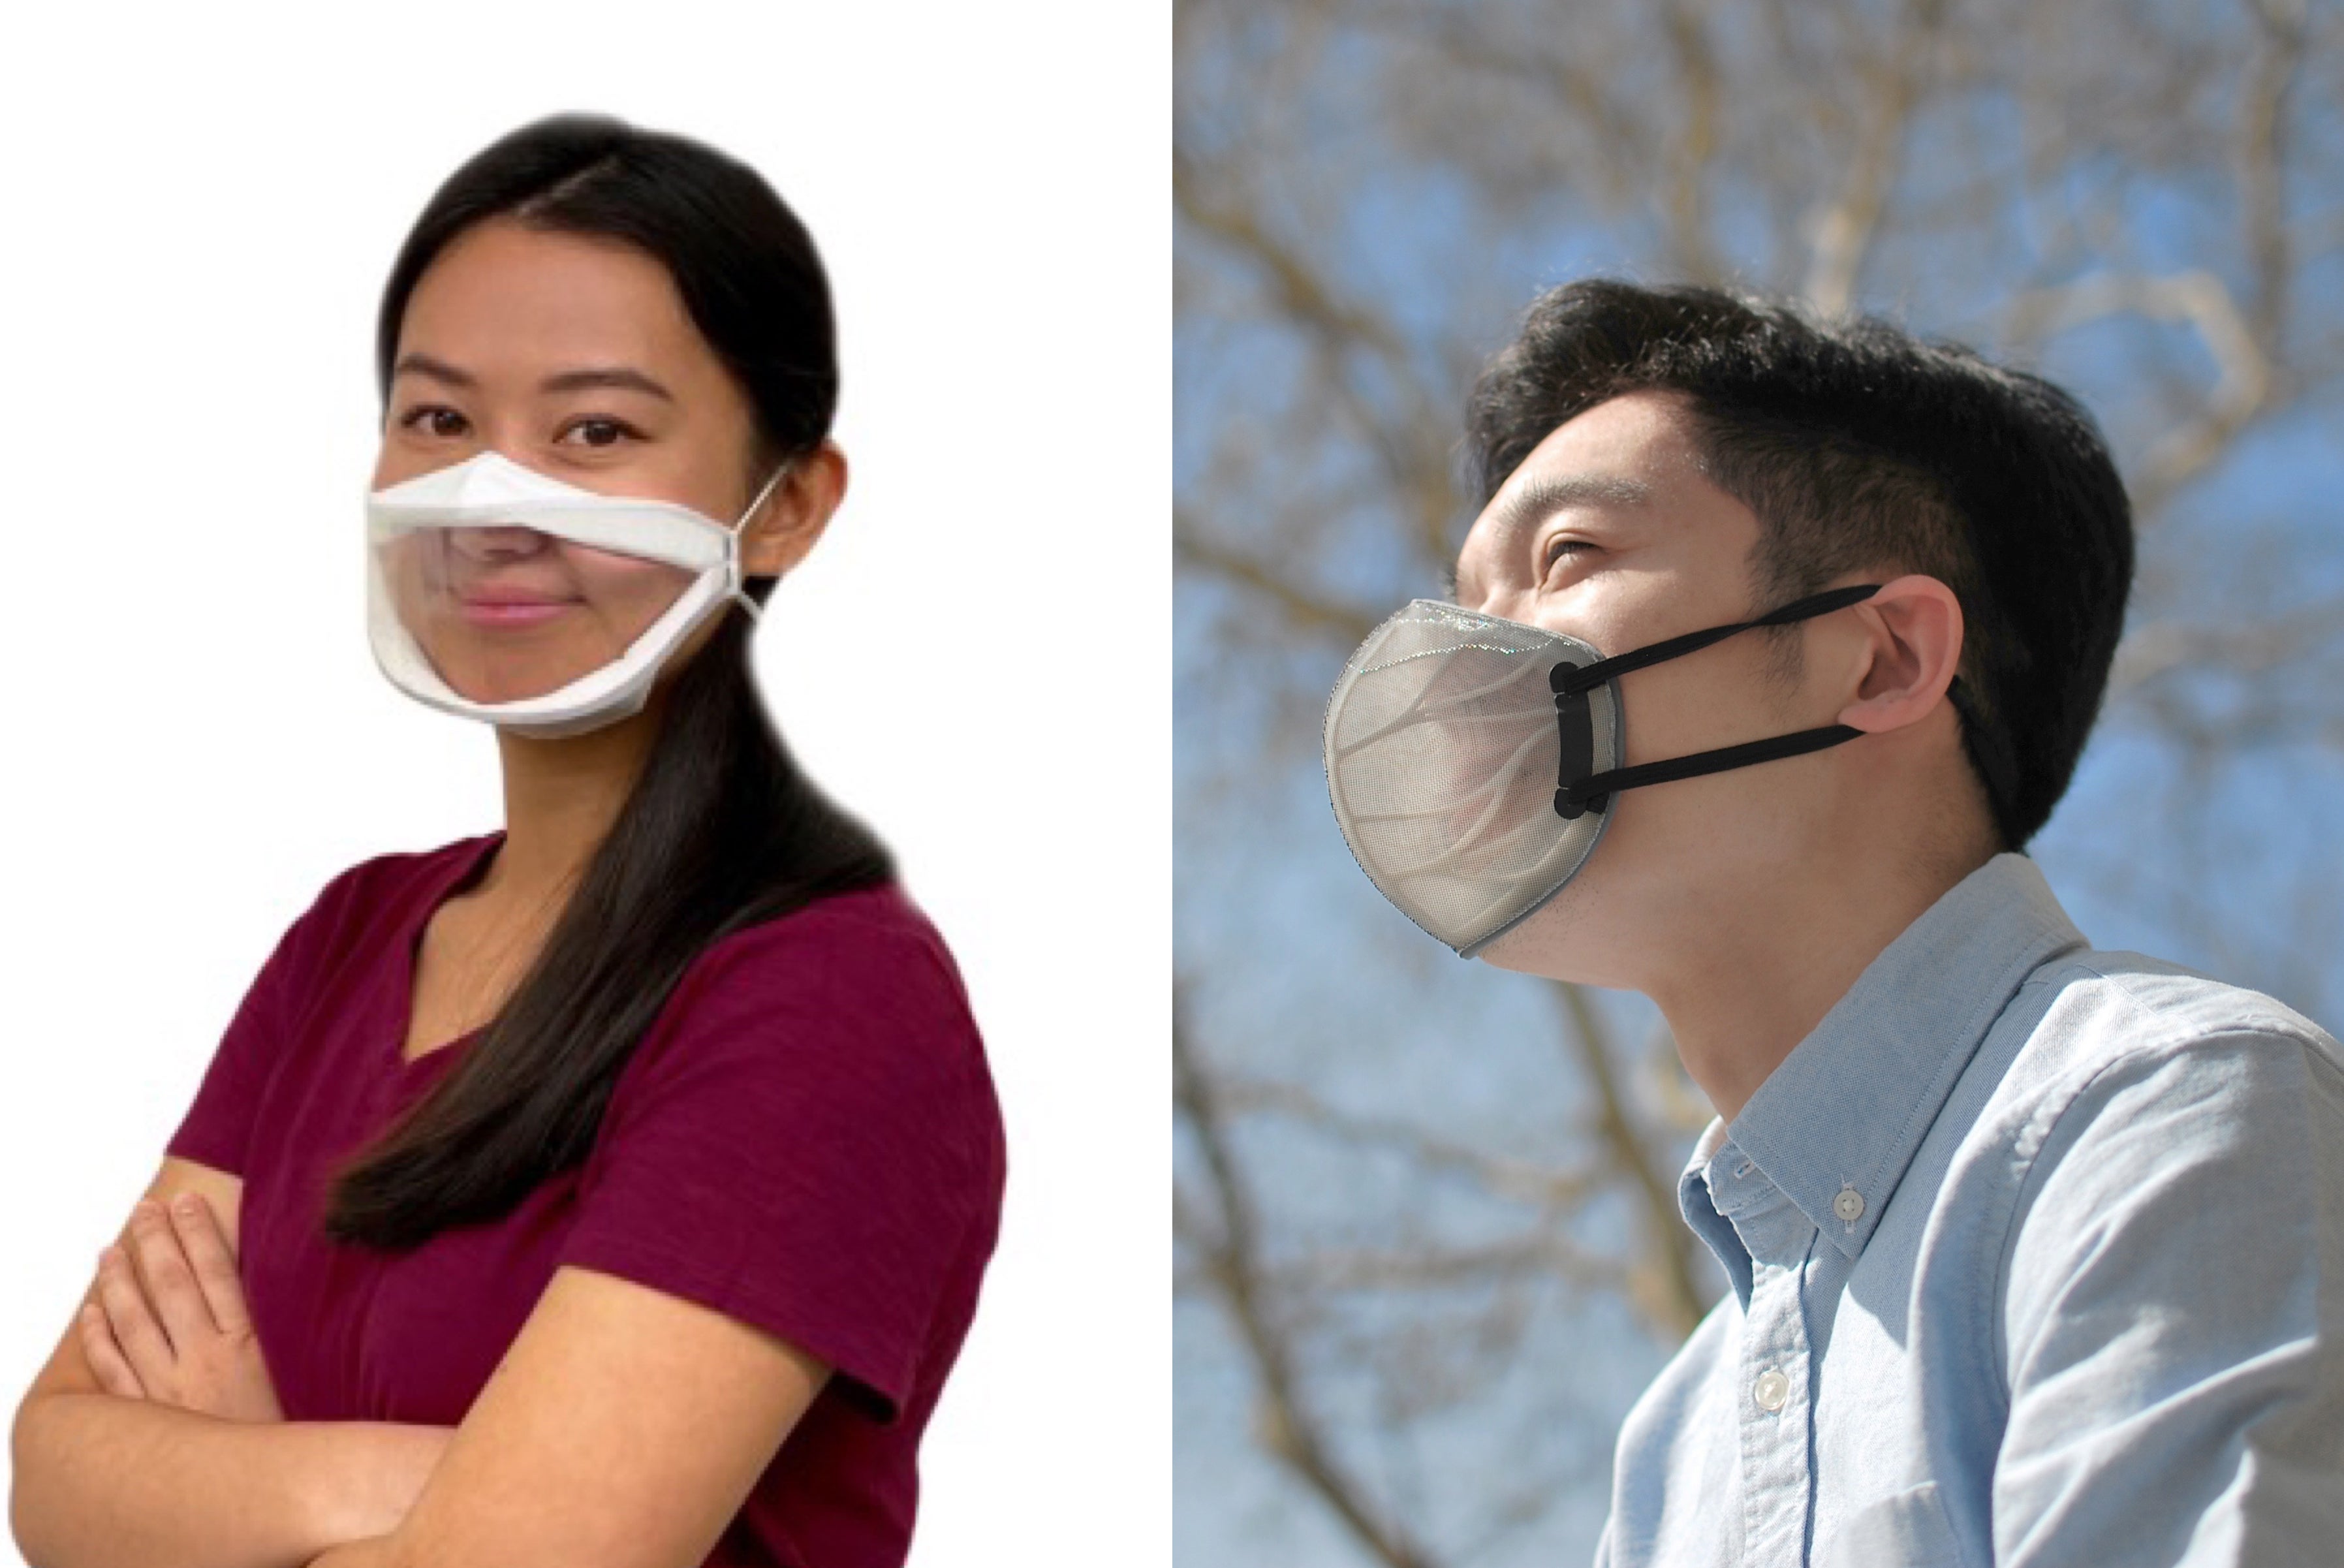 Several finalists, including ClearMask (left) and BreSafe (right), have created transparent or translucent facial covers that make facial expressions easier to read without sacrificing filtration.